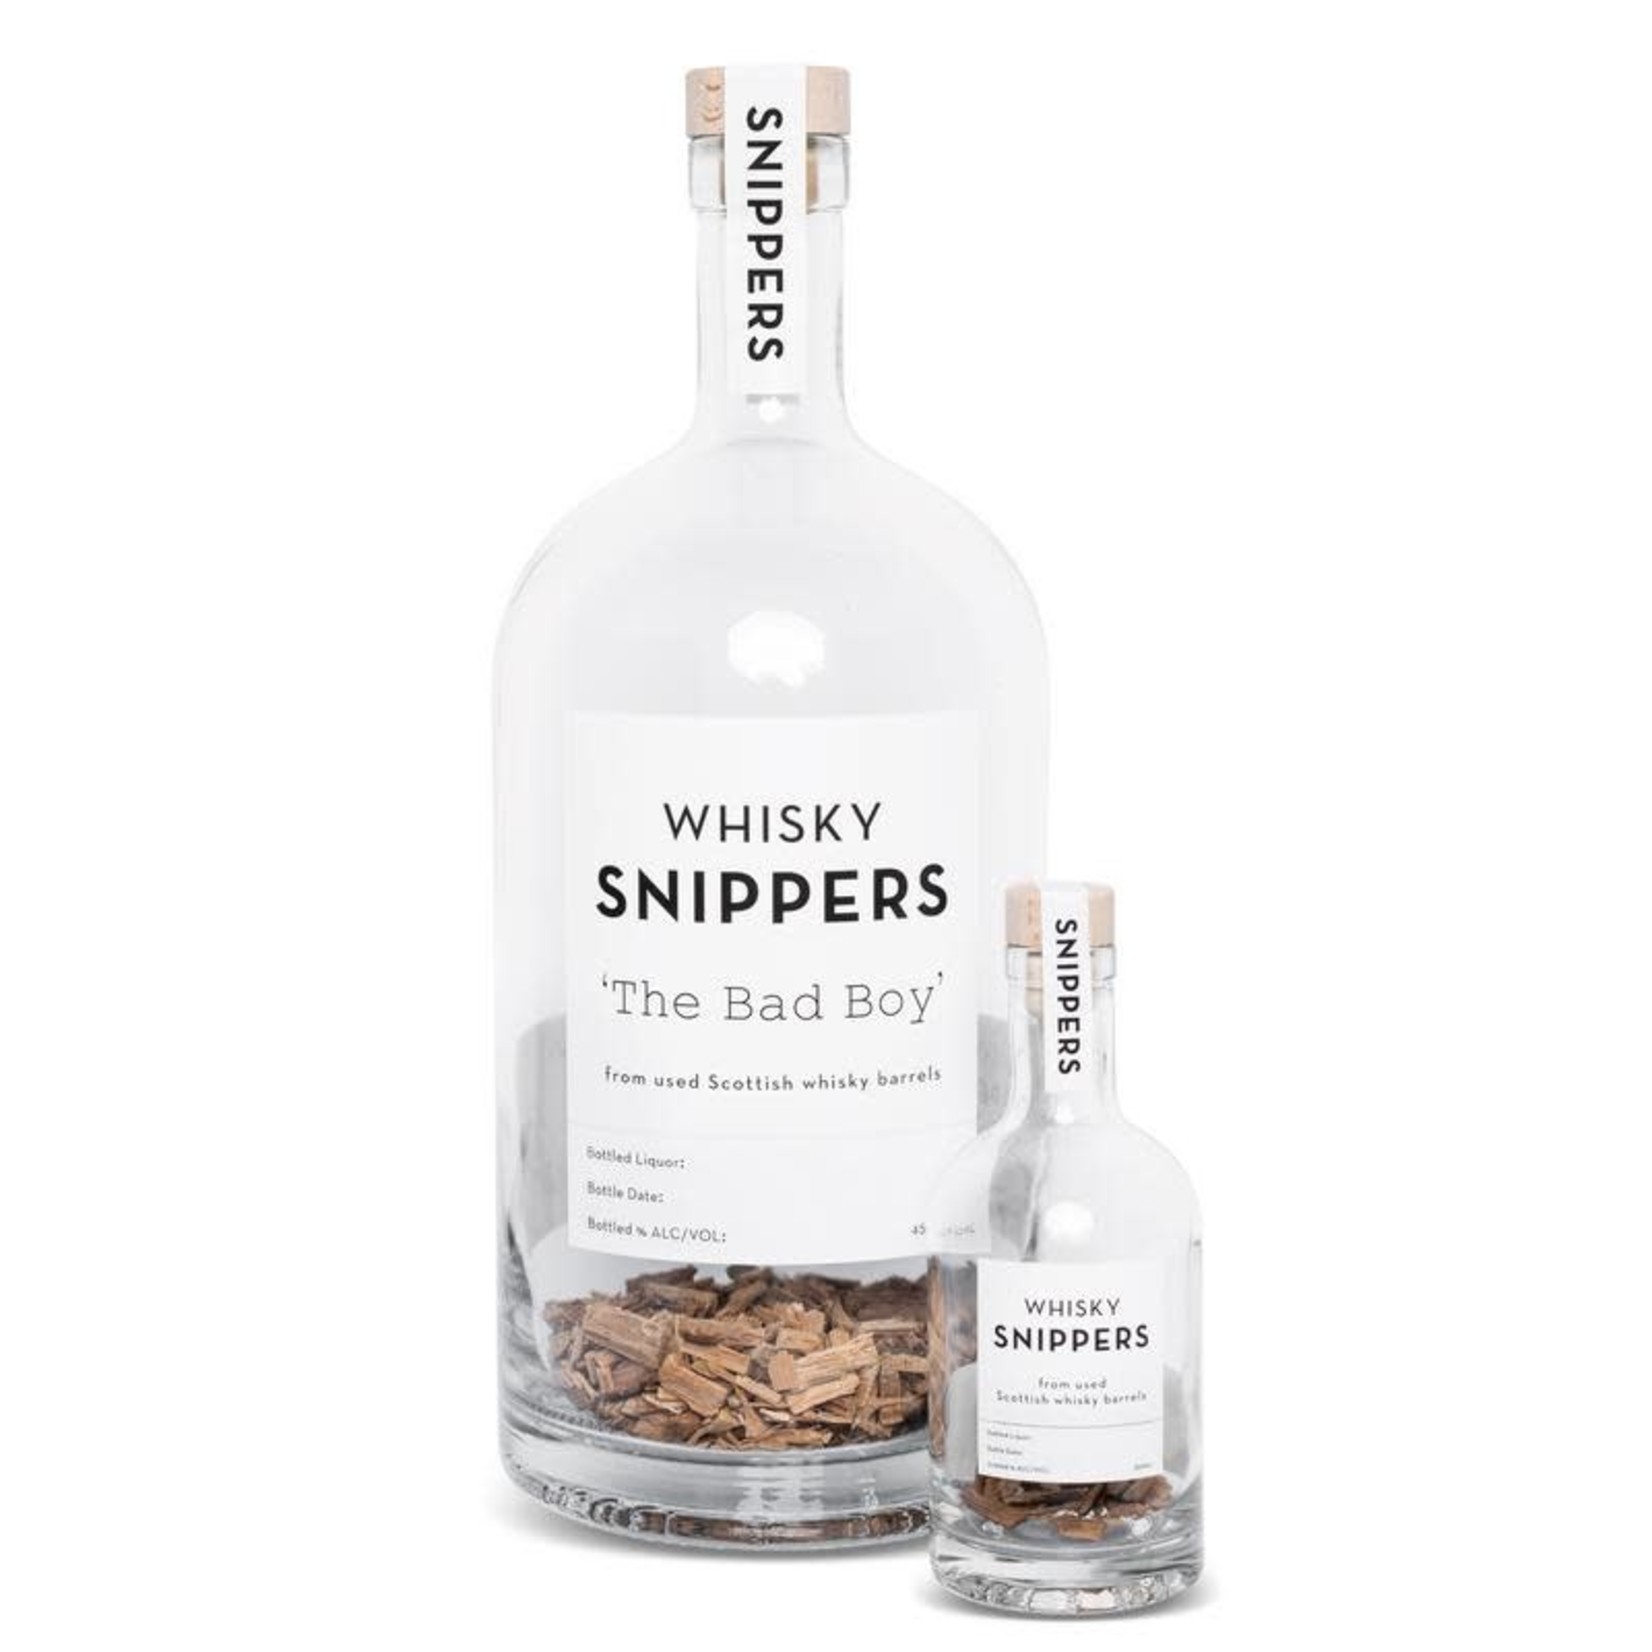 SNIPPERS SNIPPERS - The Bad Boy - Whisky